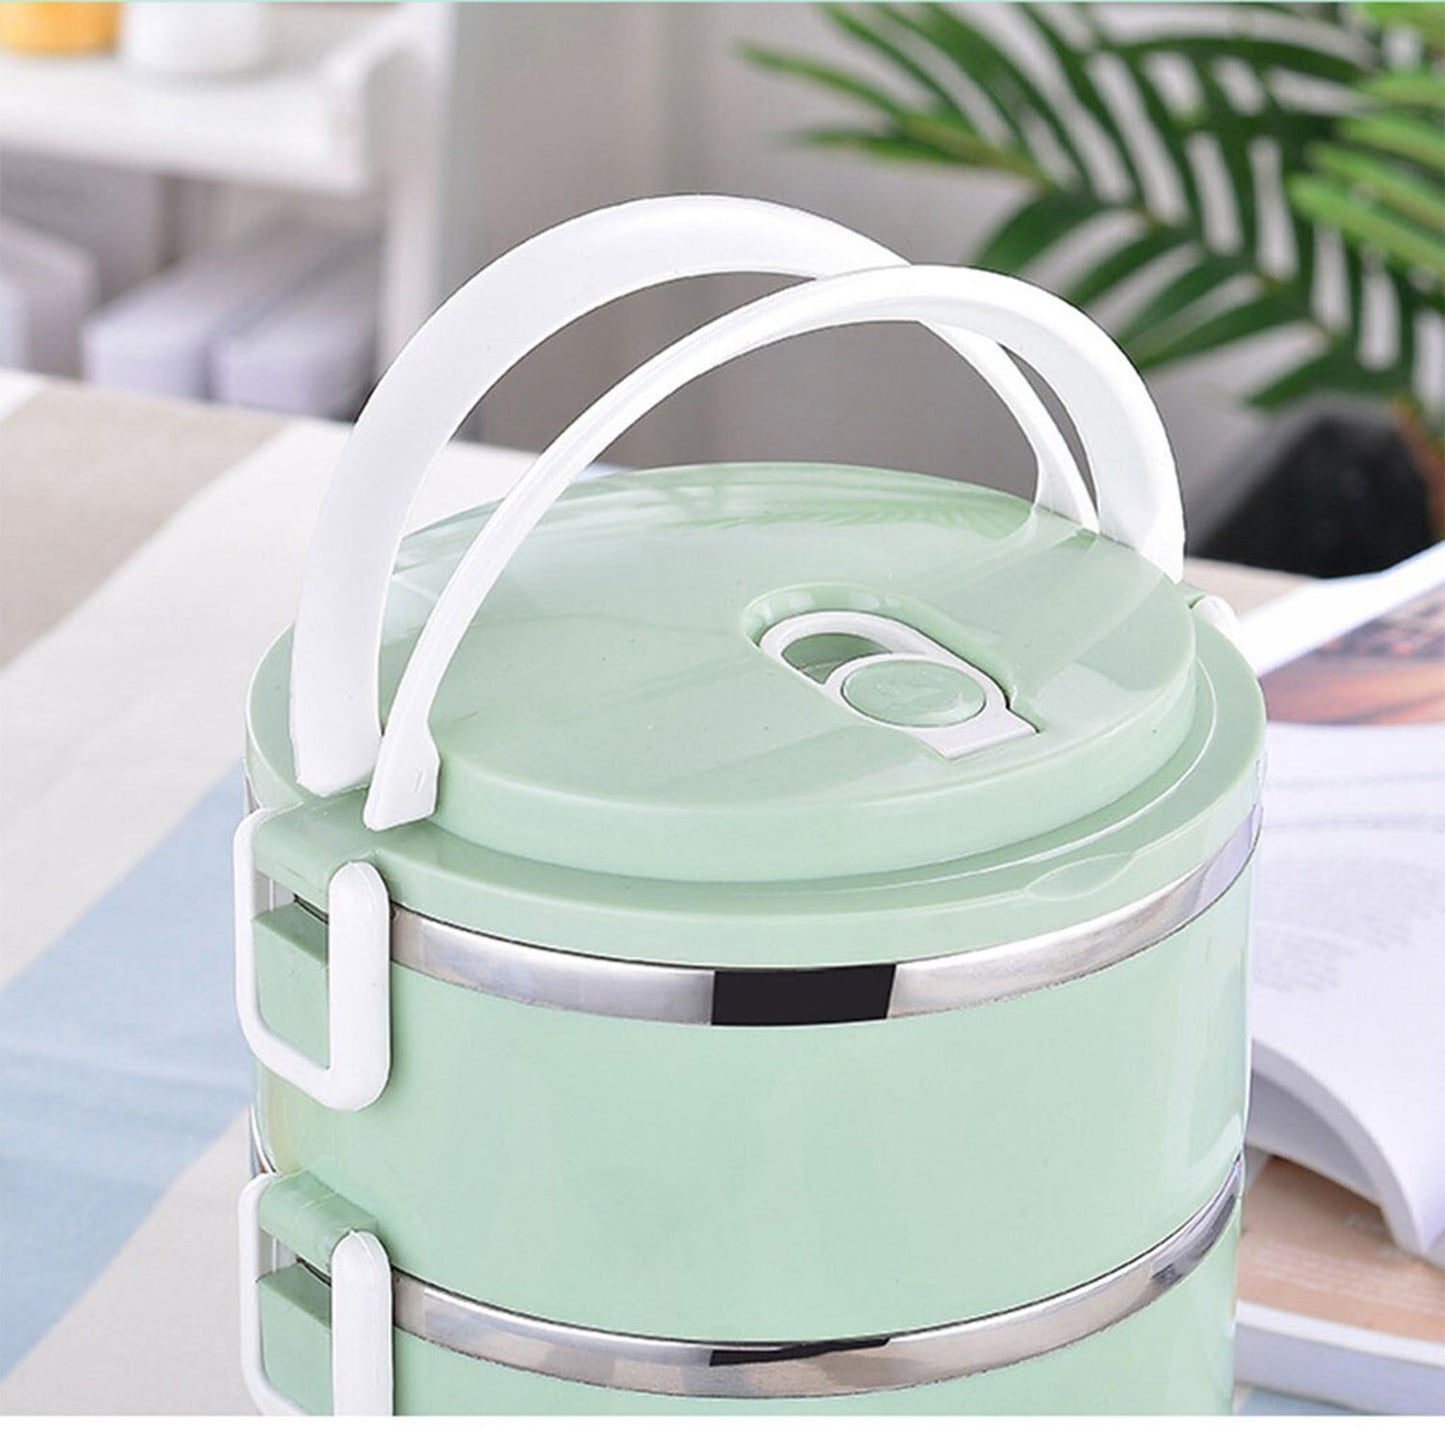 2873 Multi Layer Stainless Steel Hot Lunch Box (2 Layer) DeoDap